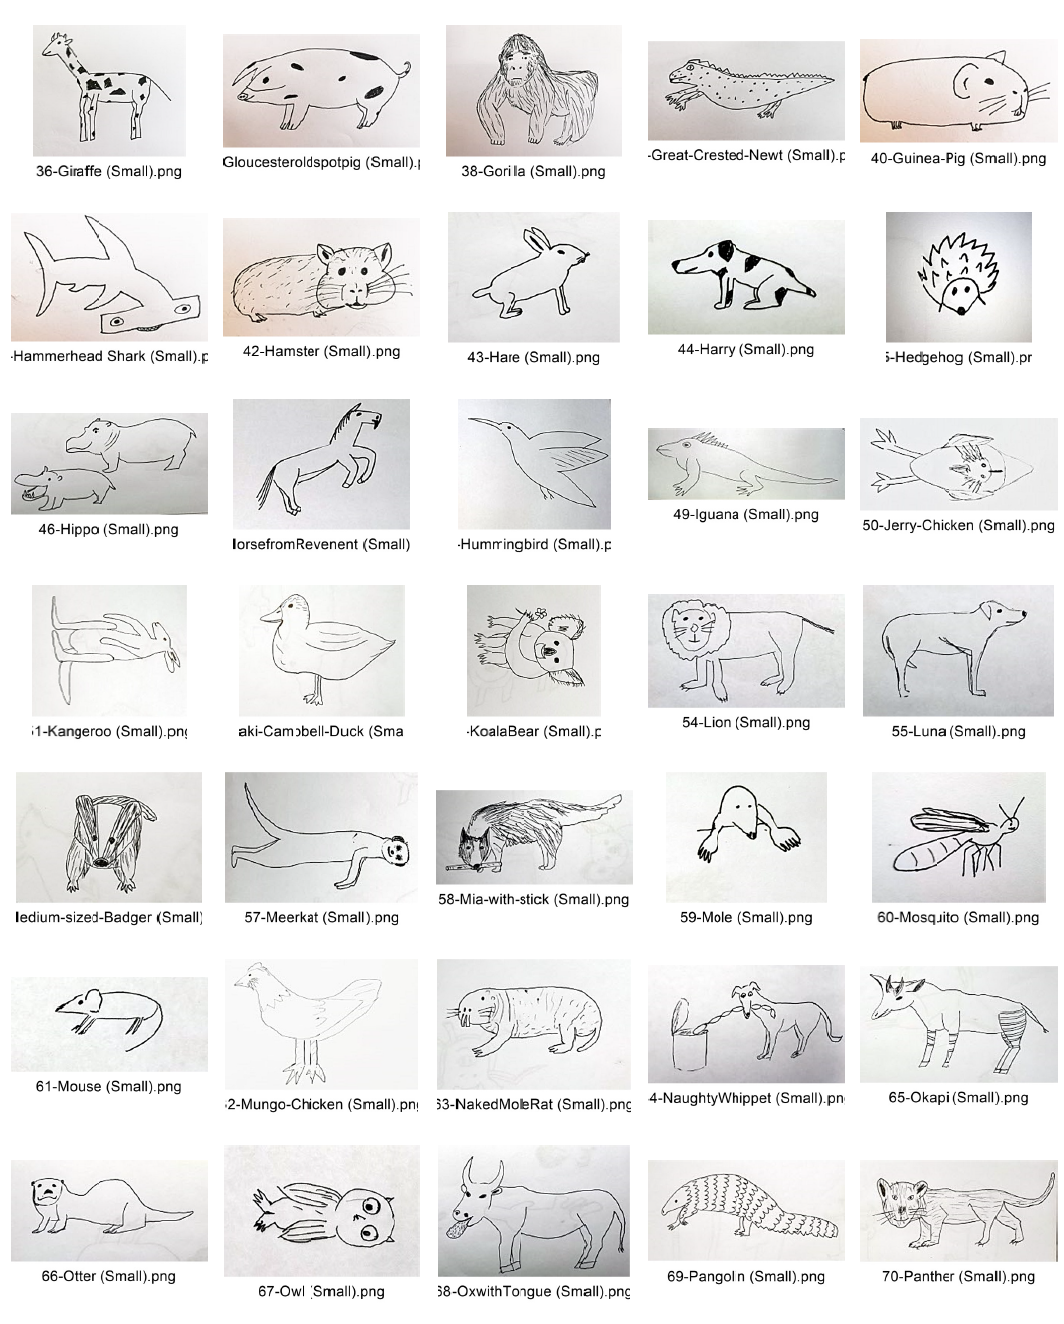 Gallery of 100 badly drawn animals